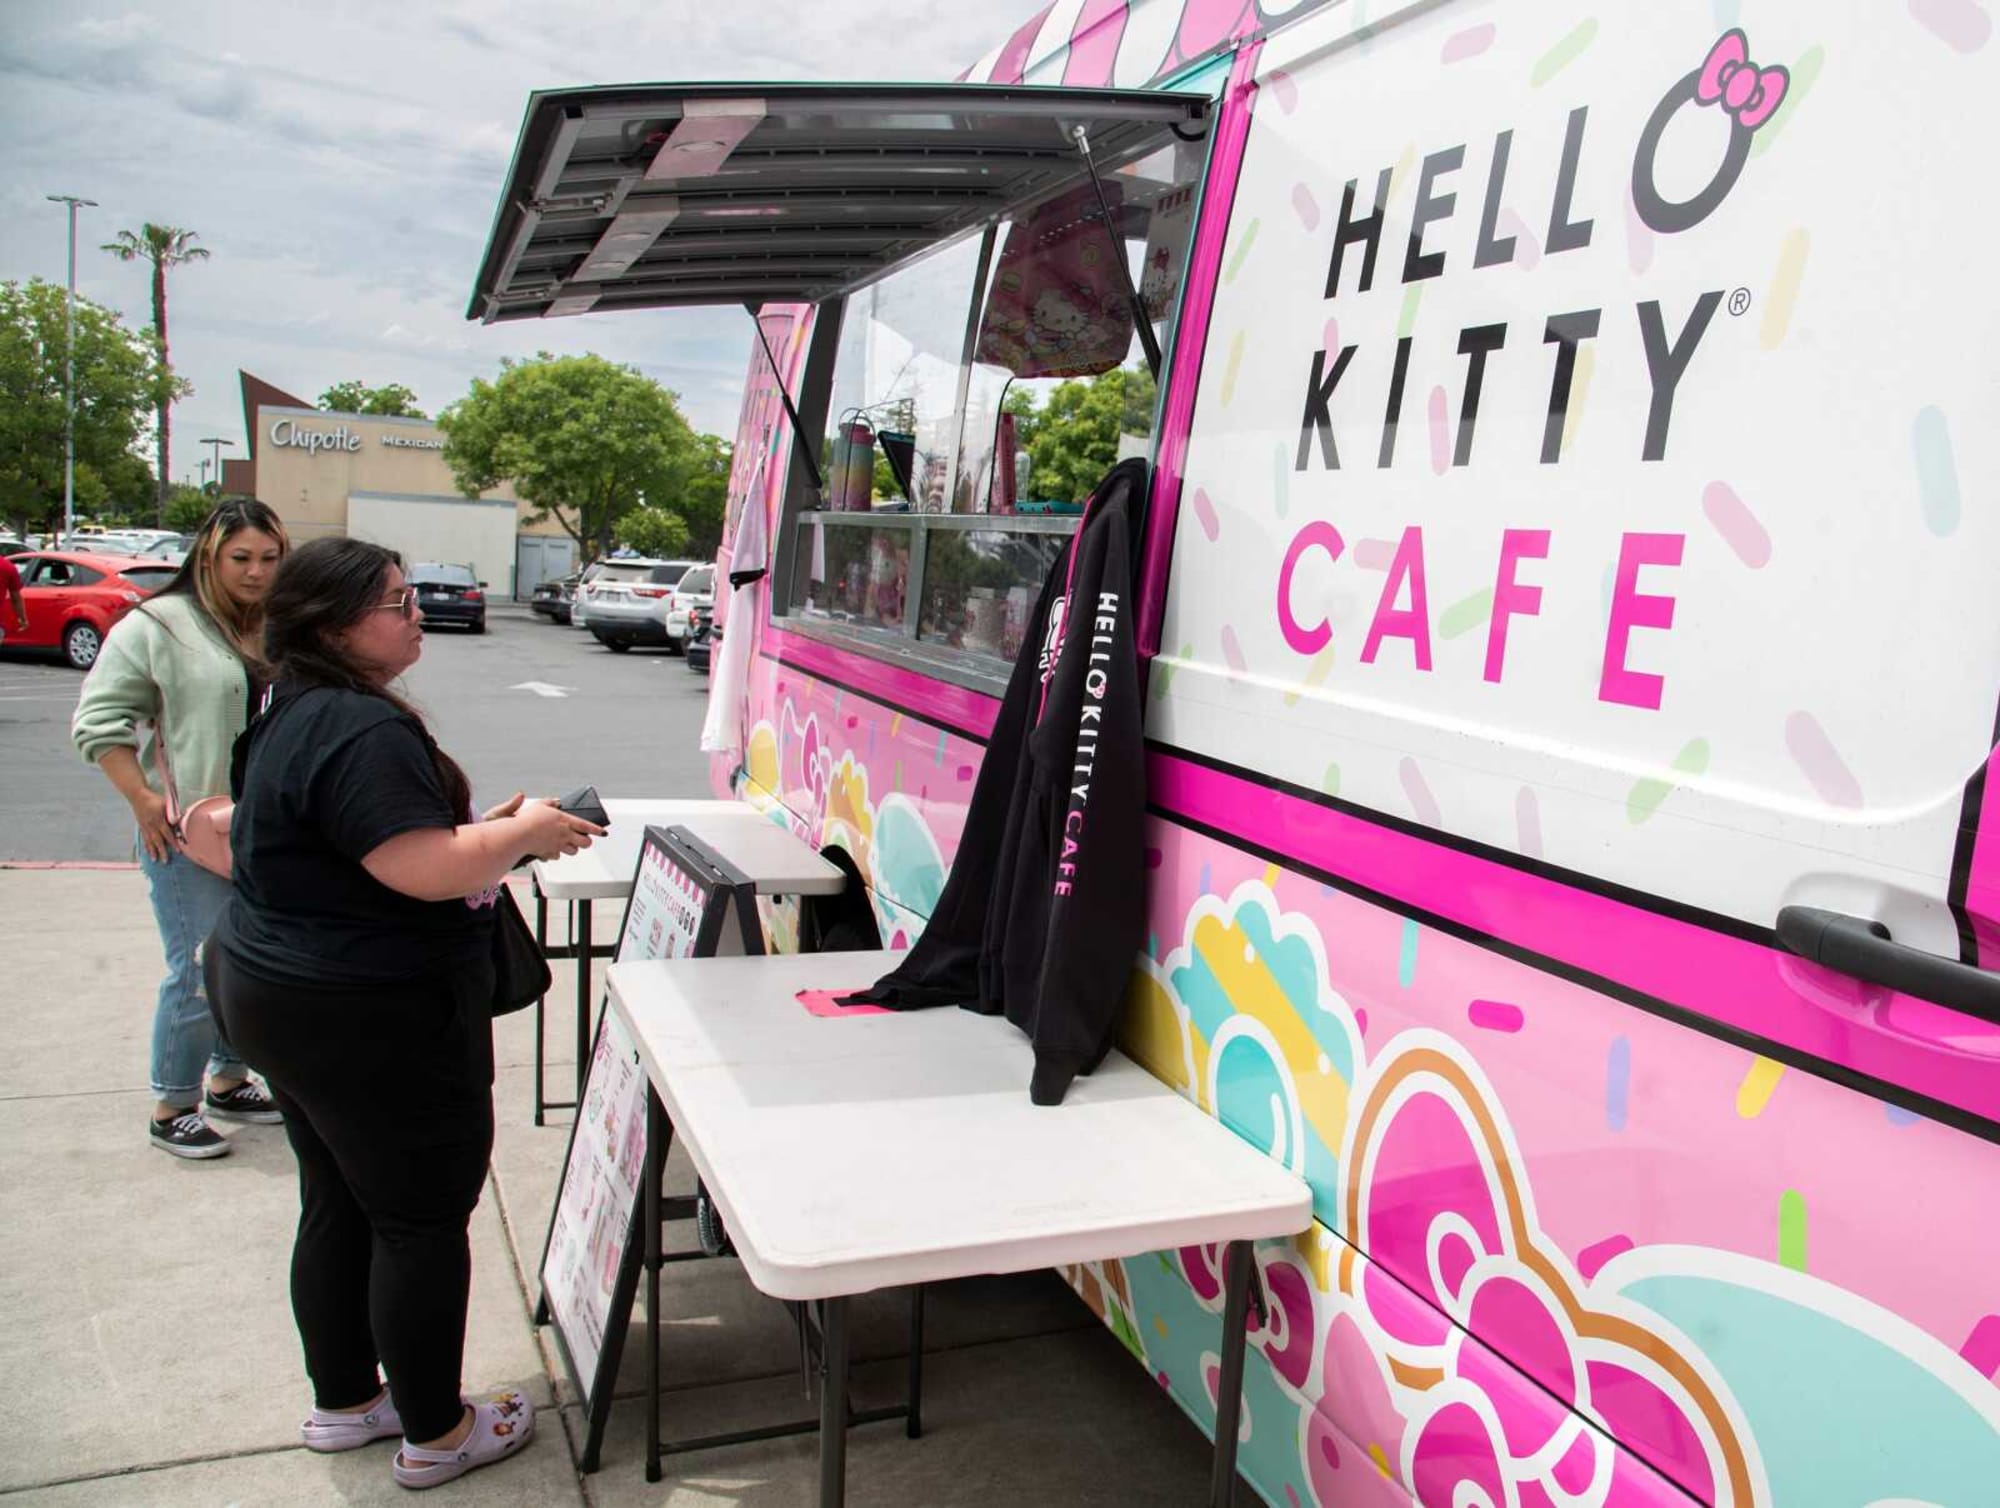 The Hello Kitty Cafe Truck is a must for Sanrio fans